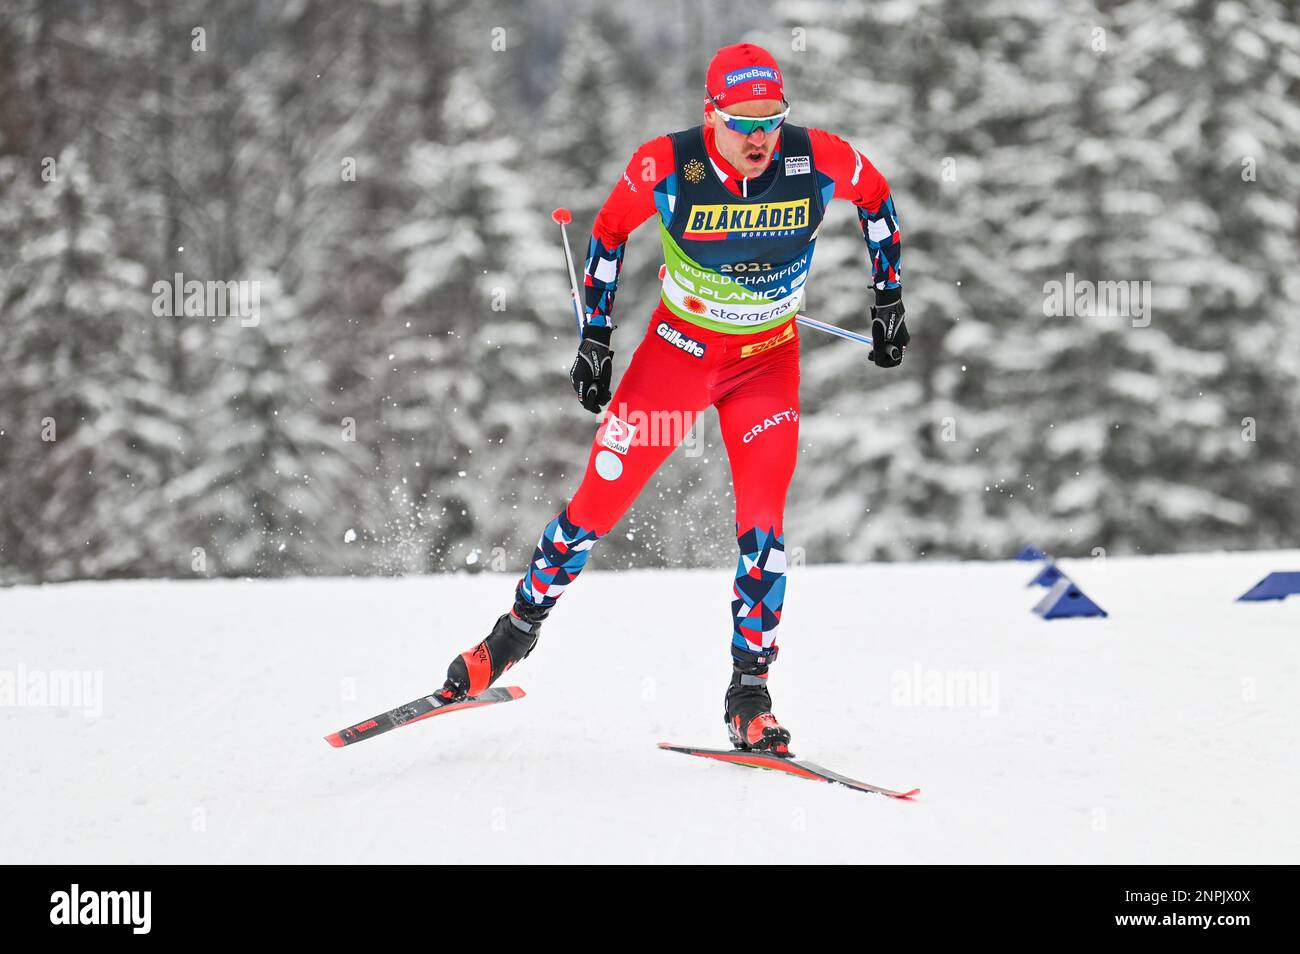 Planica, Slovenia. 26th Feb, 2023. Norwegian Paal Golberg  en route to taking the gold medal in the team sprint at the 2023 FIS World Nordic Ski Championships in Planica, Slovenia, February 26, 2023 with his teammate Johanness Hoesflot Klaebo. John Lazenby/Alamy Live News Credit: John Candler Lazenby/Alamy Live News Stock Photo